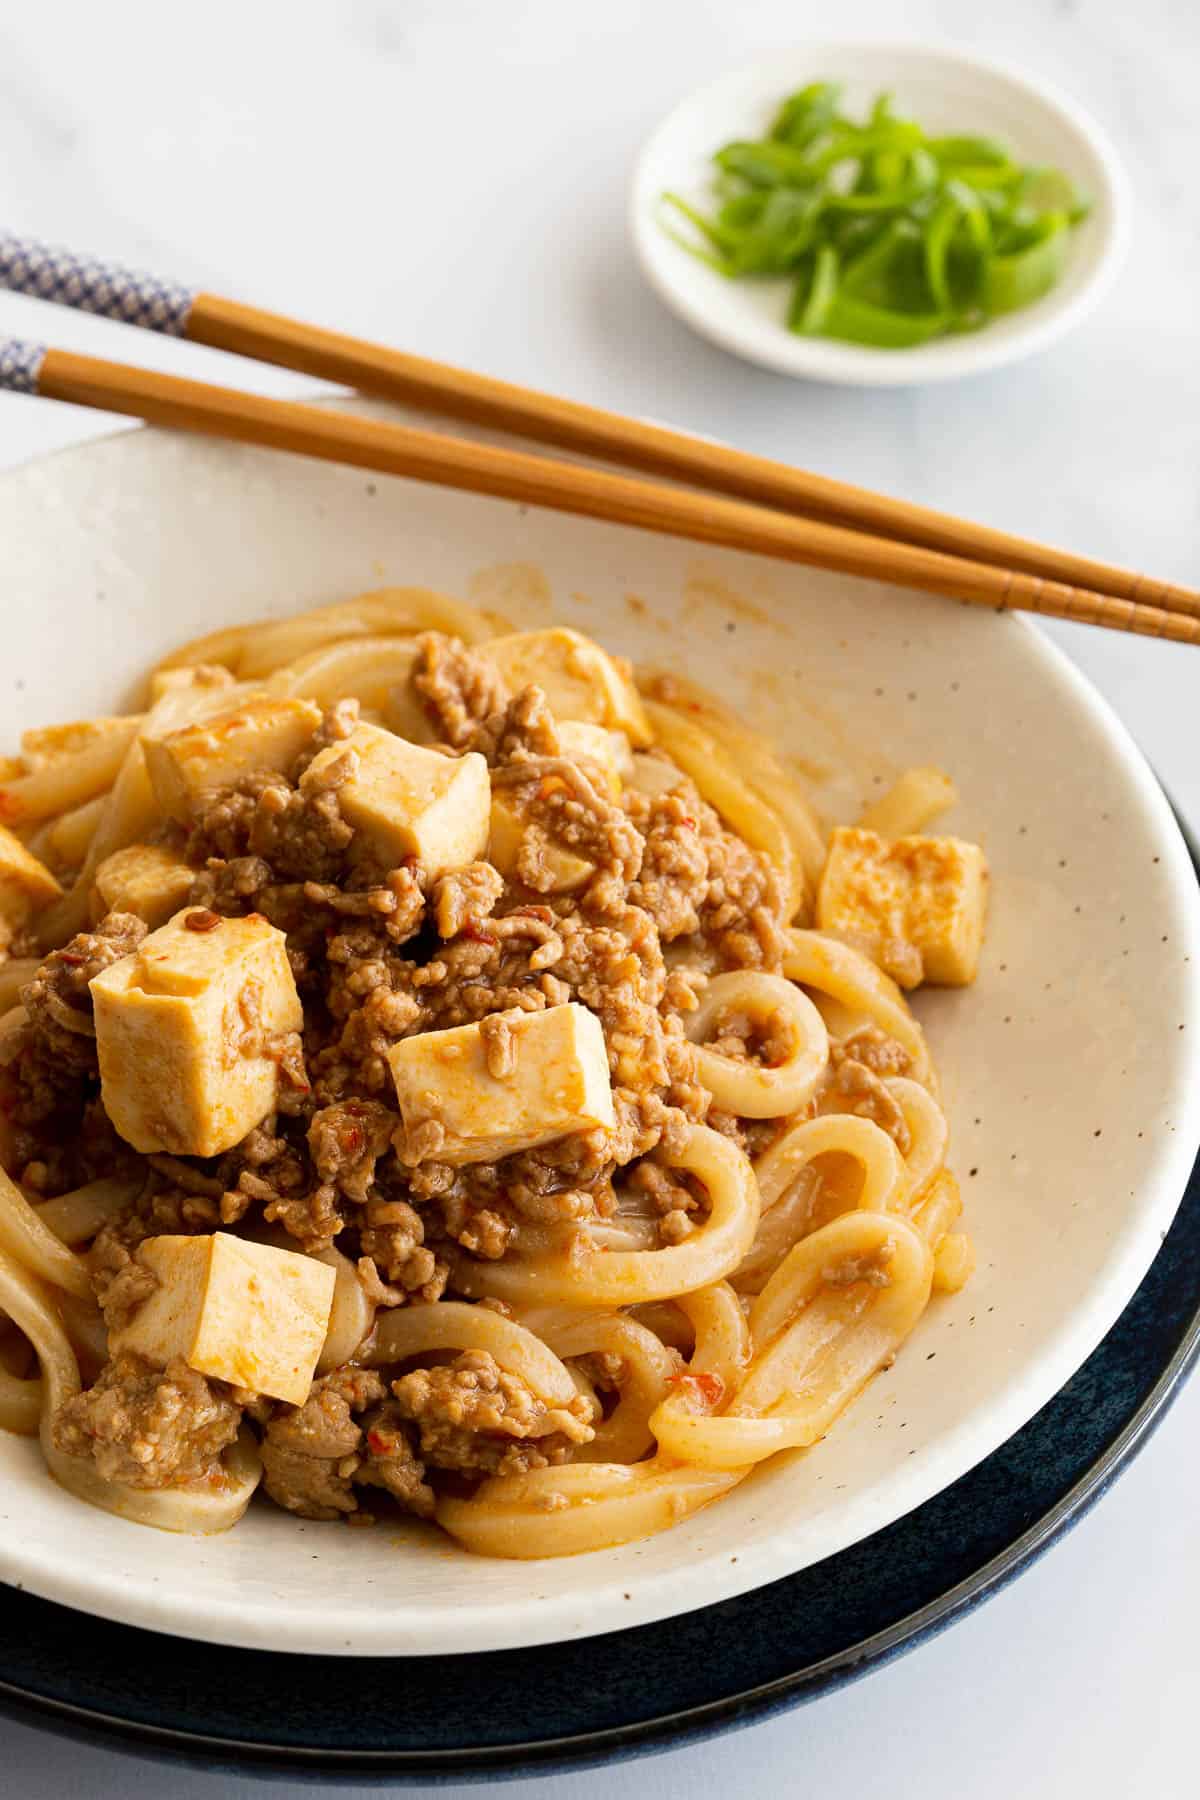 Spicy mabo tofu sauce on top of udon noodles.